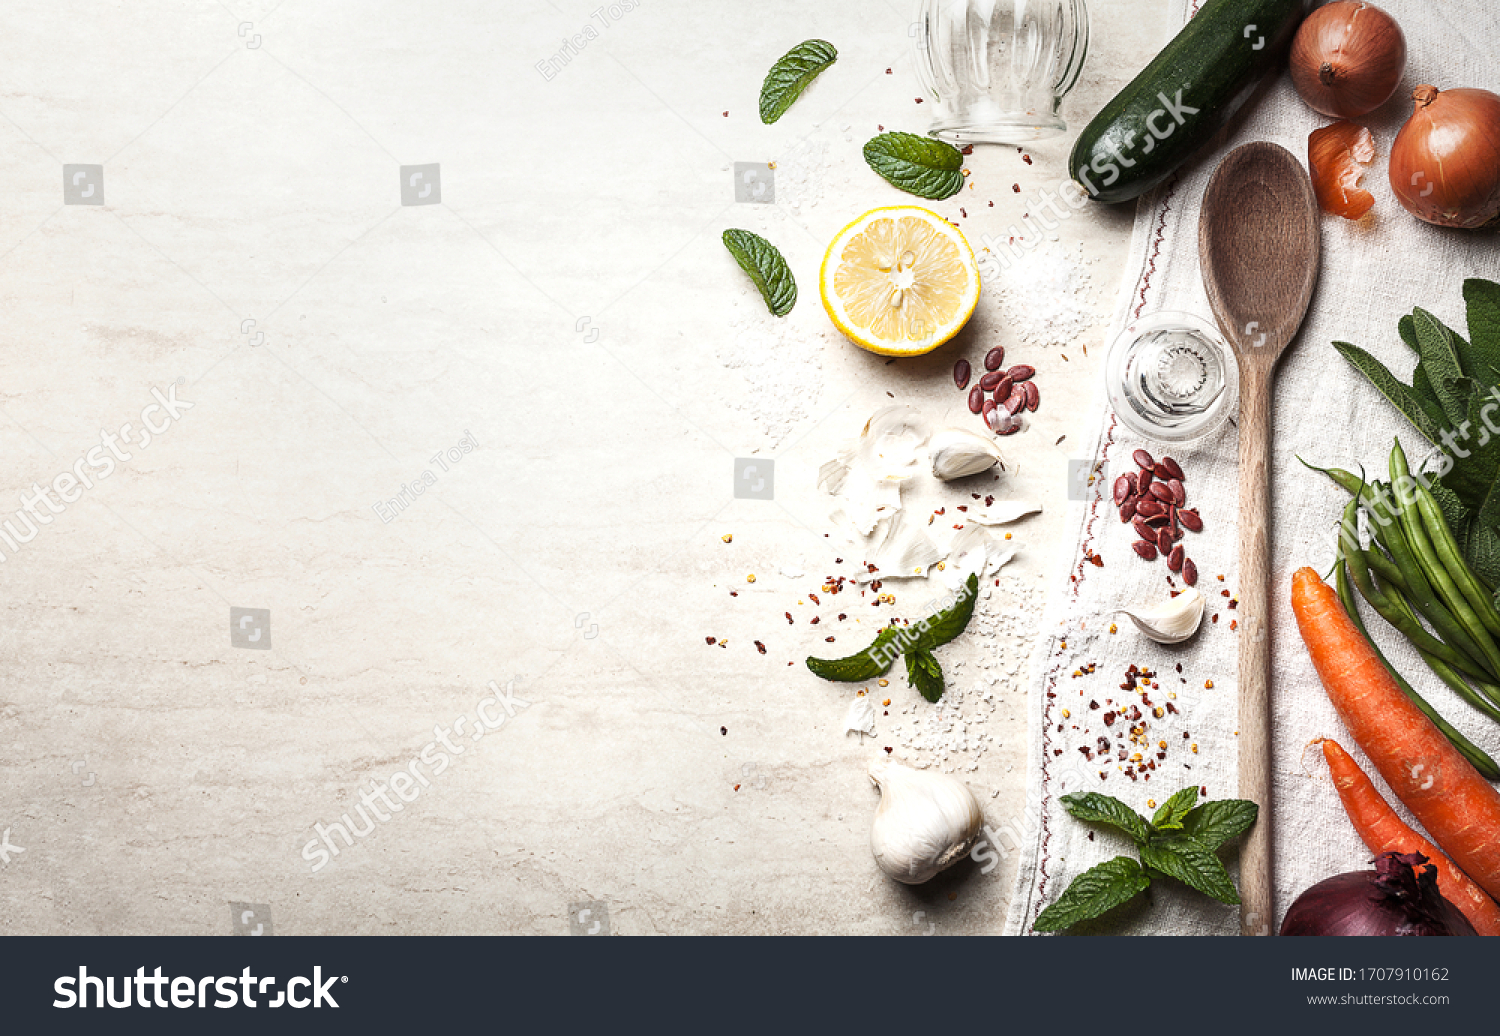 Background Image Foodthemed Which Right Half Stock Photo 1707910162 ...